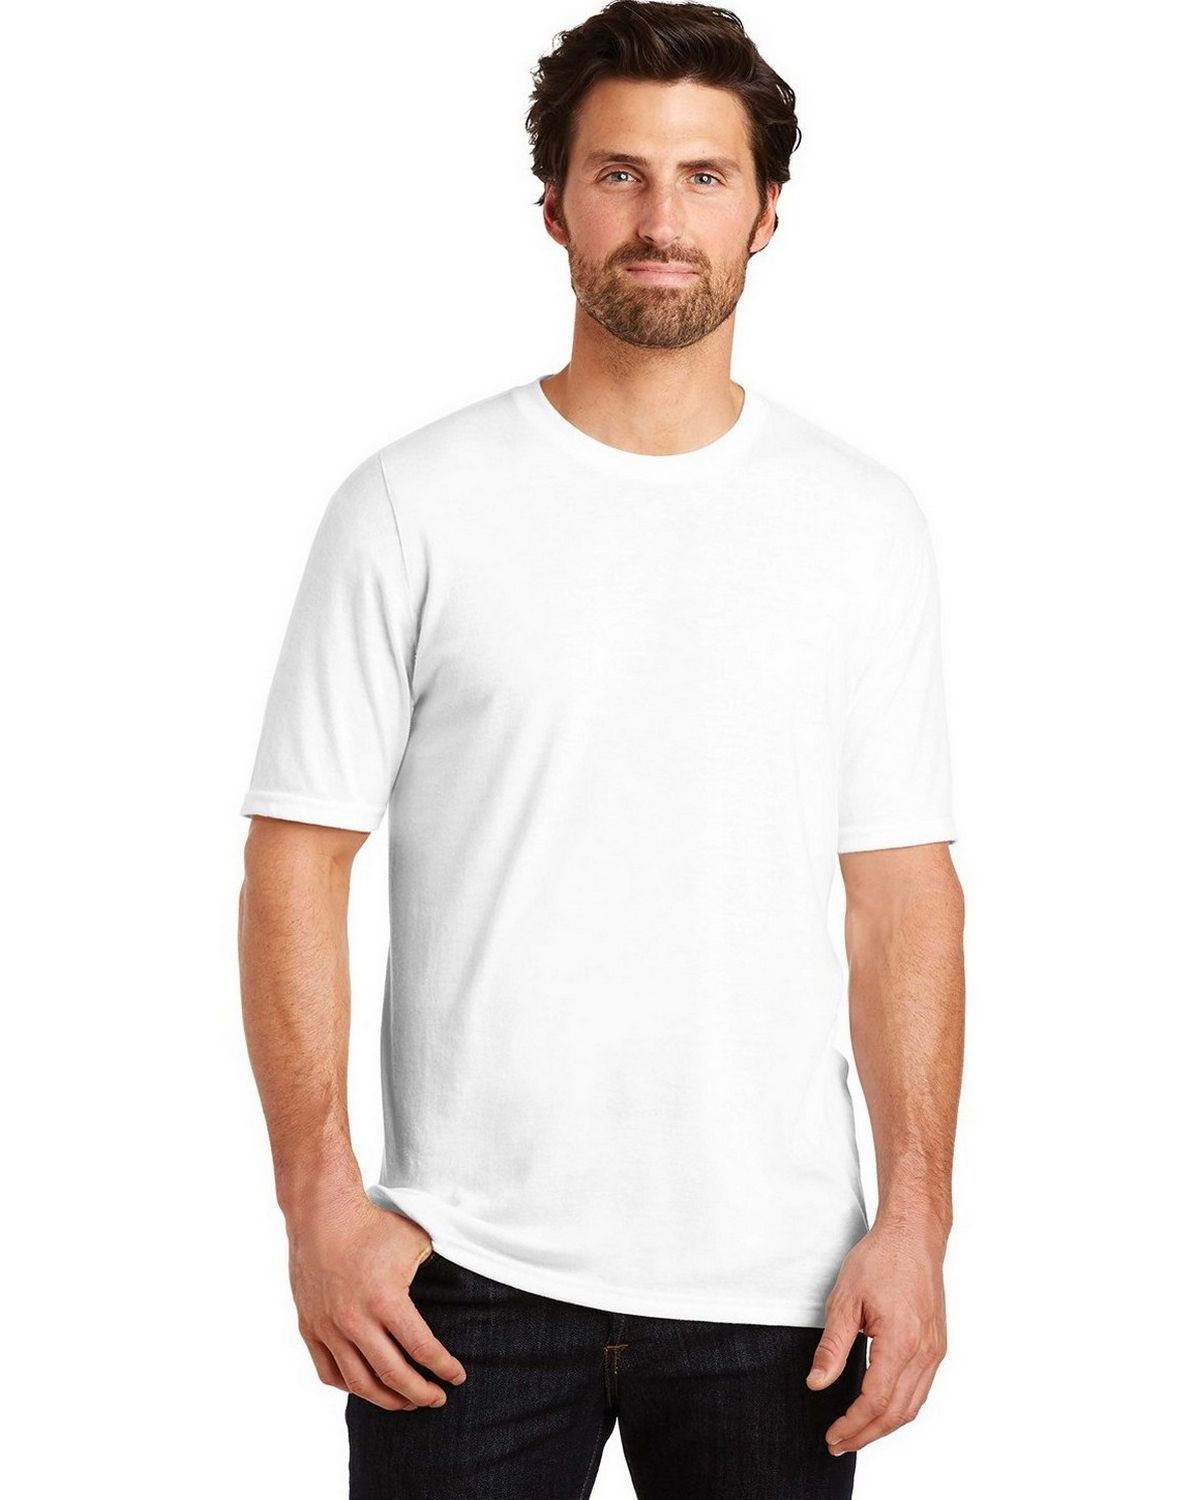 Size Chart for District DM130 Mens Perfect Tri Crew Tee